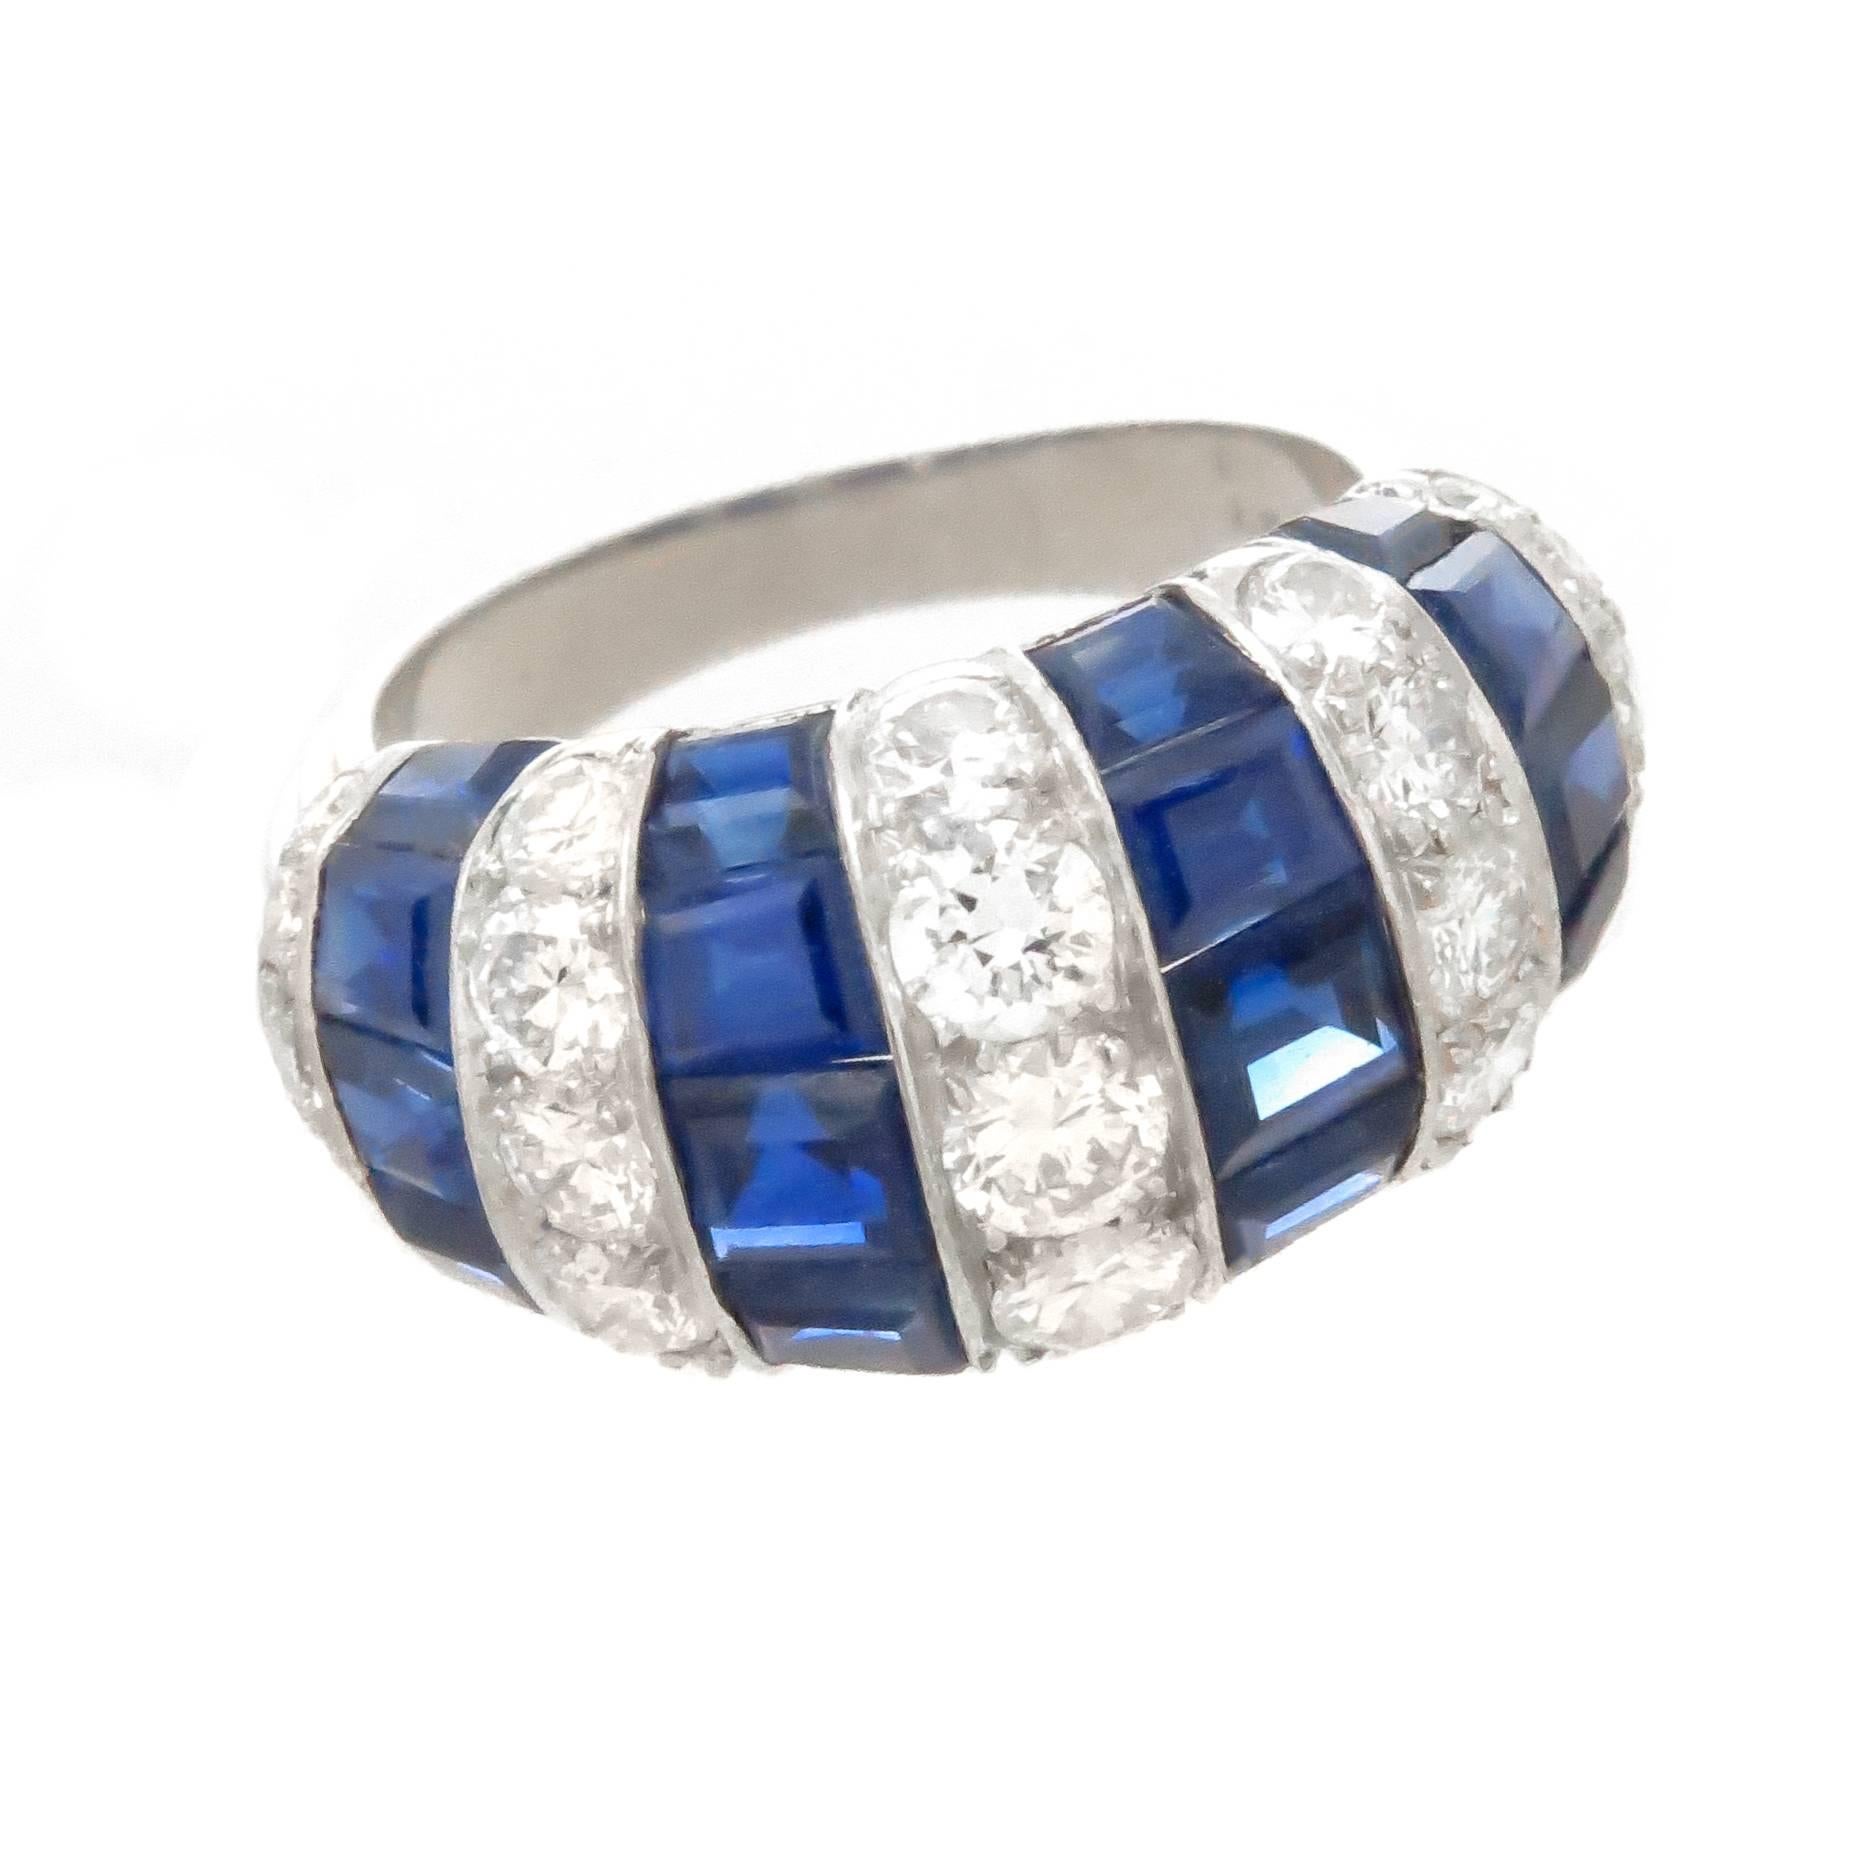 Circa 1990 Oscar Heyman & Brothers Platinum Ring, set with Round Brilliant cut Diamonds totaling 1 carat and Square cut Sapphires totaling 1 Carat. The top of the ring measures 3/4 inch in length and 3/8 inch wide. Finger size = 4